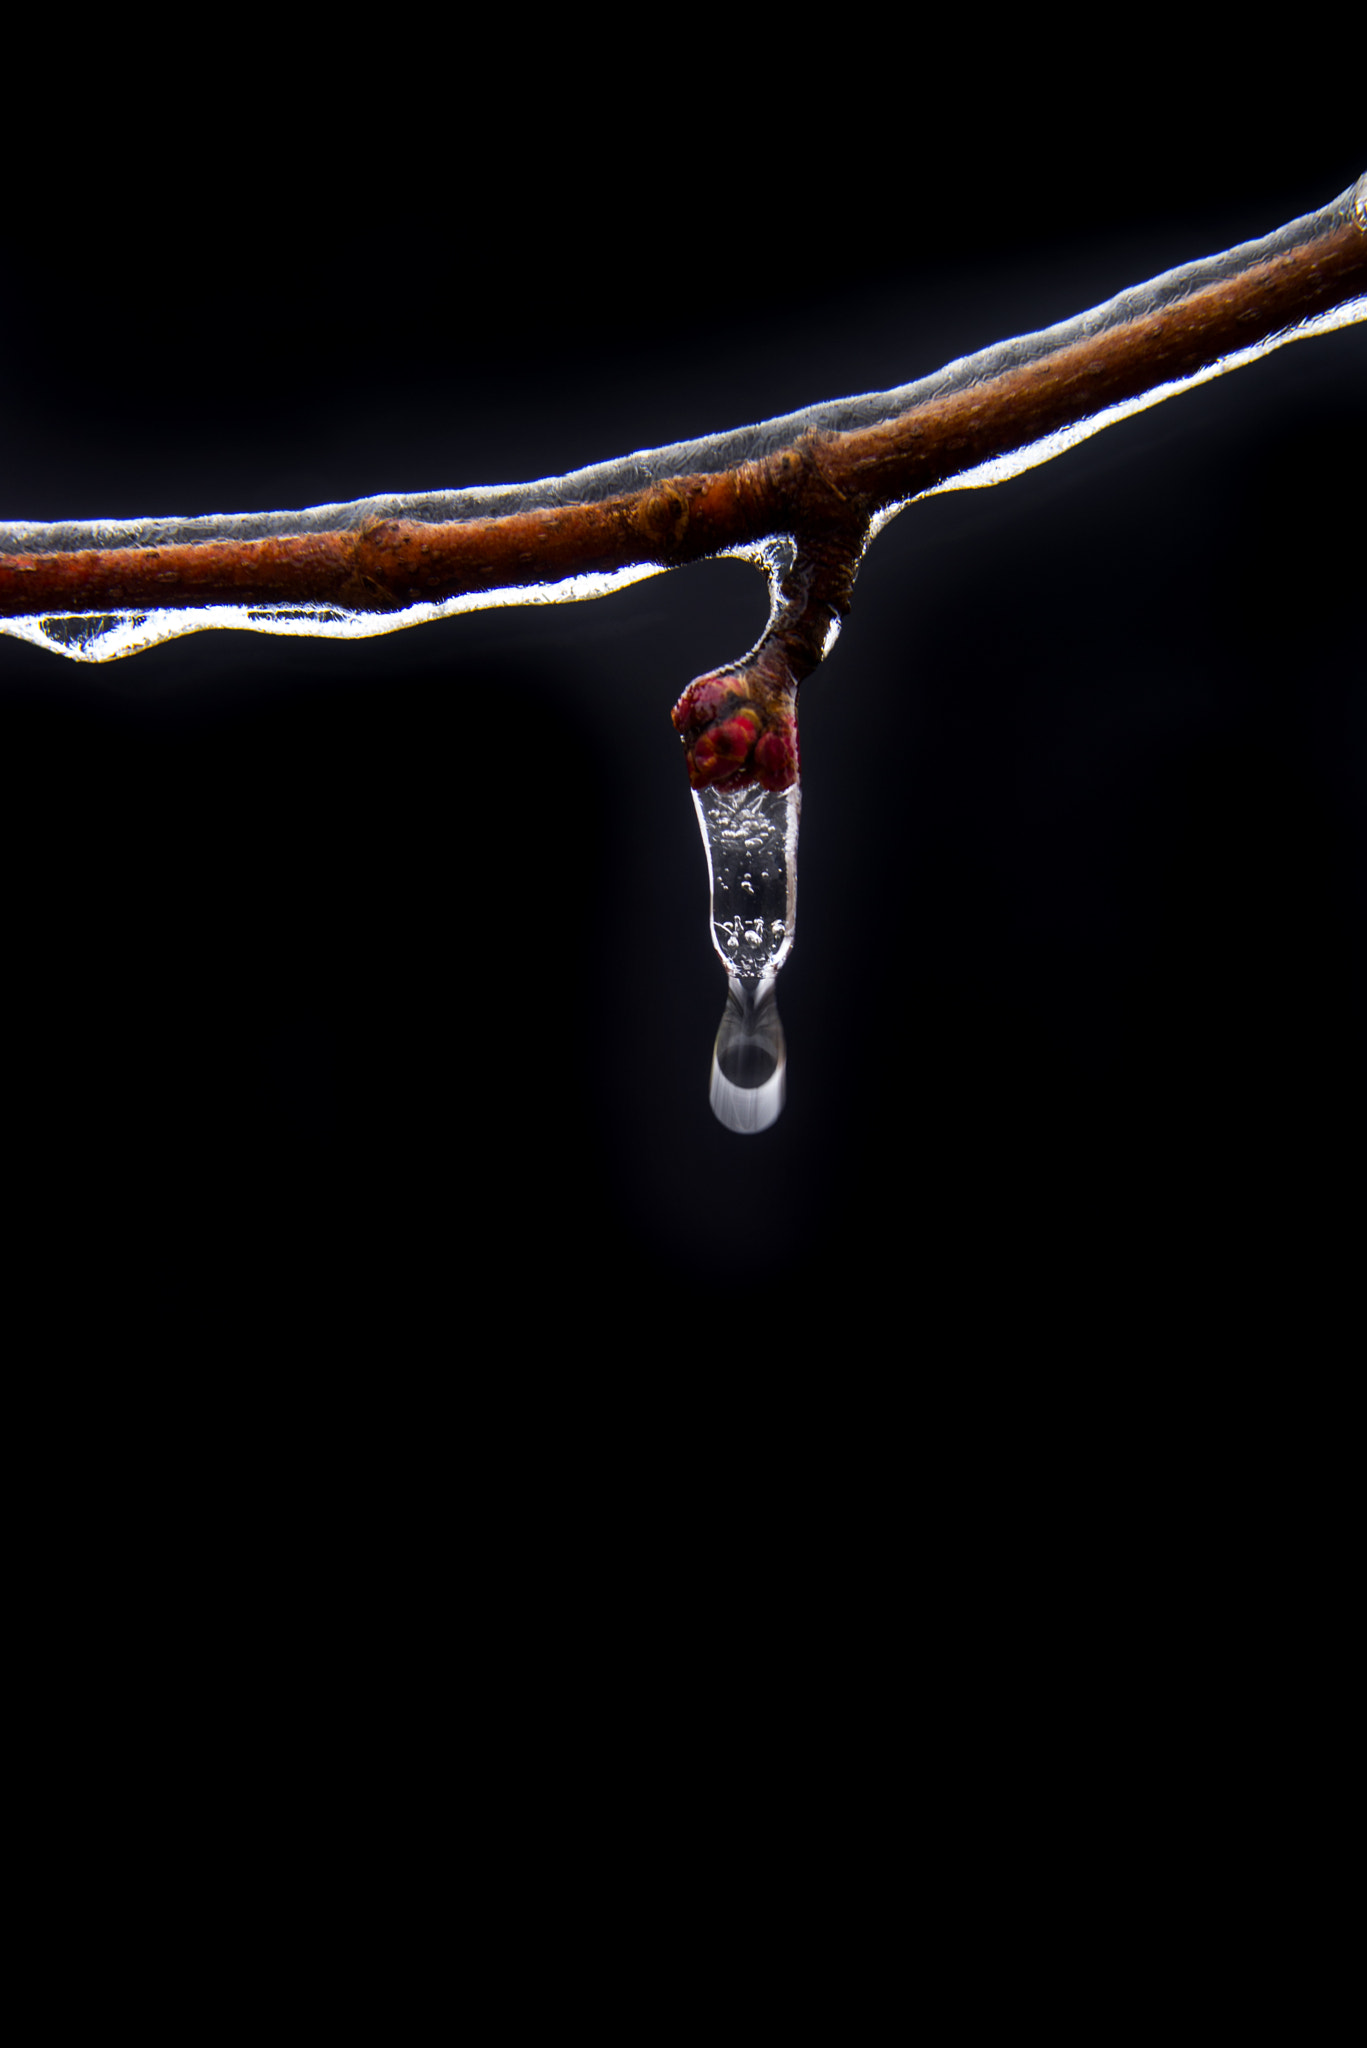 Nikon D610 + AF Zoom-Nikkor 28-80mm f/3.5-5.6D sample photo. Ice drop from branch photography